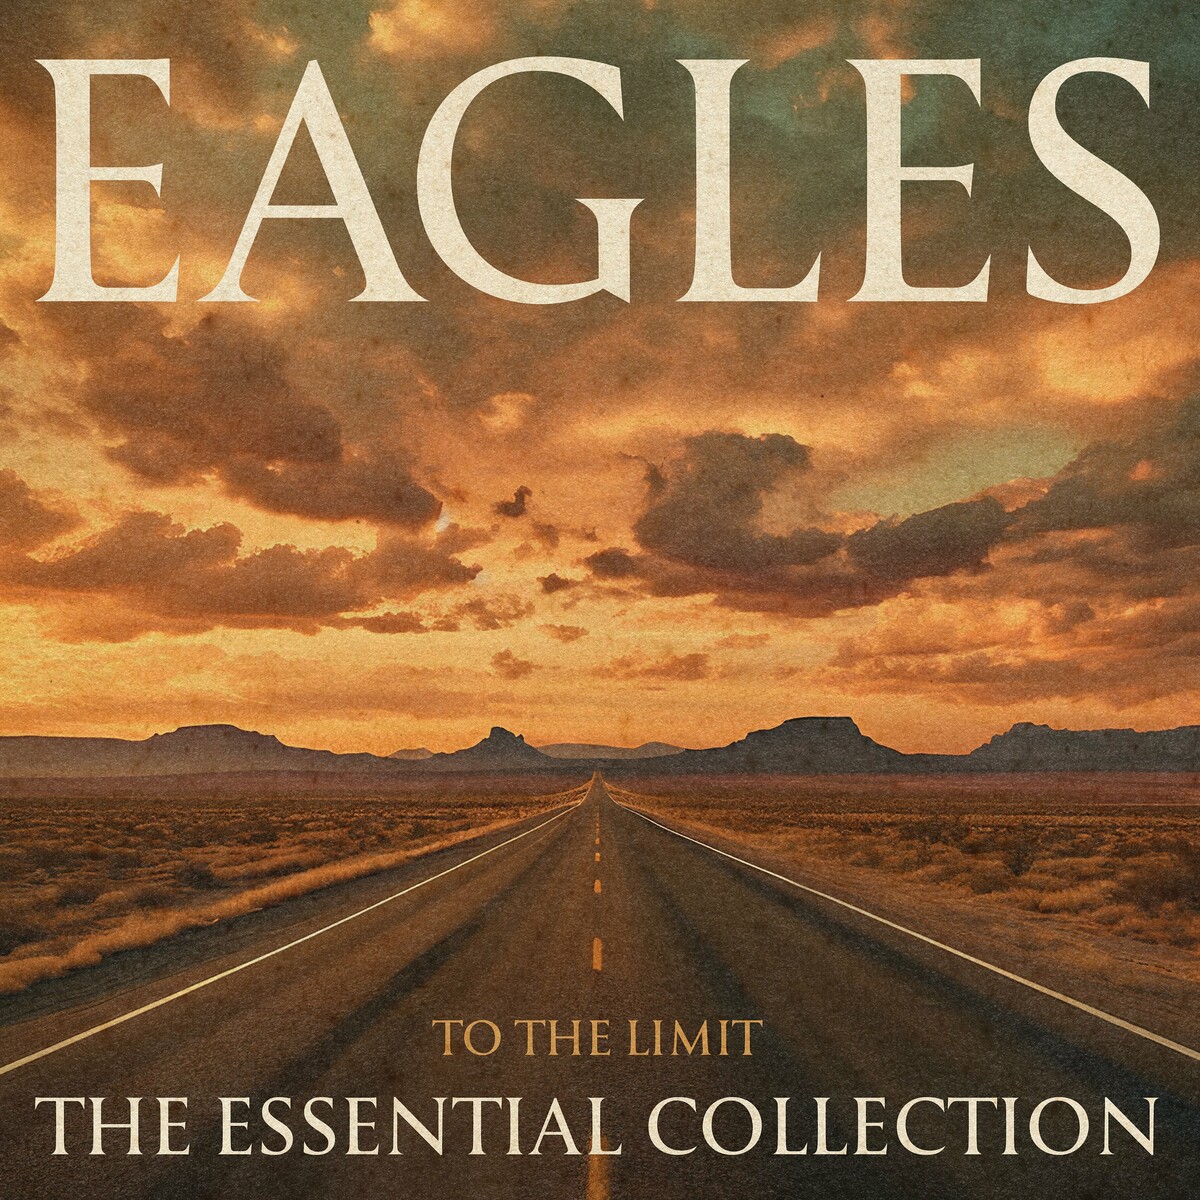 Eagles - To the Limit The Essential Collection